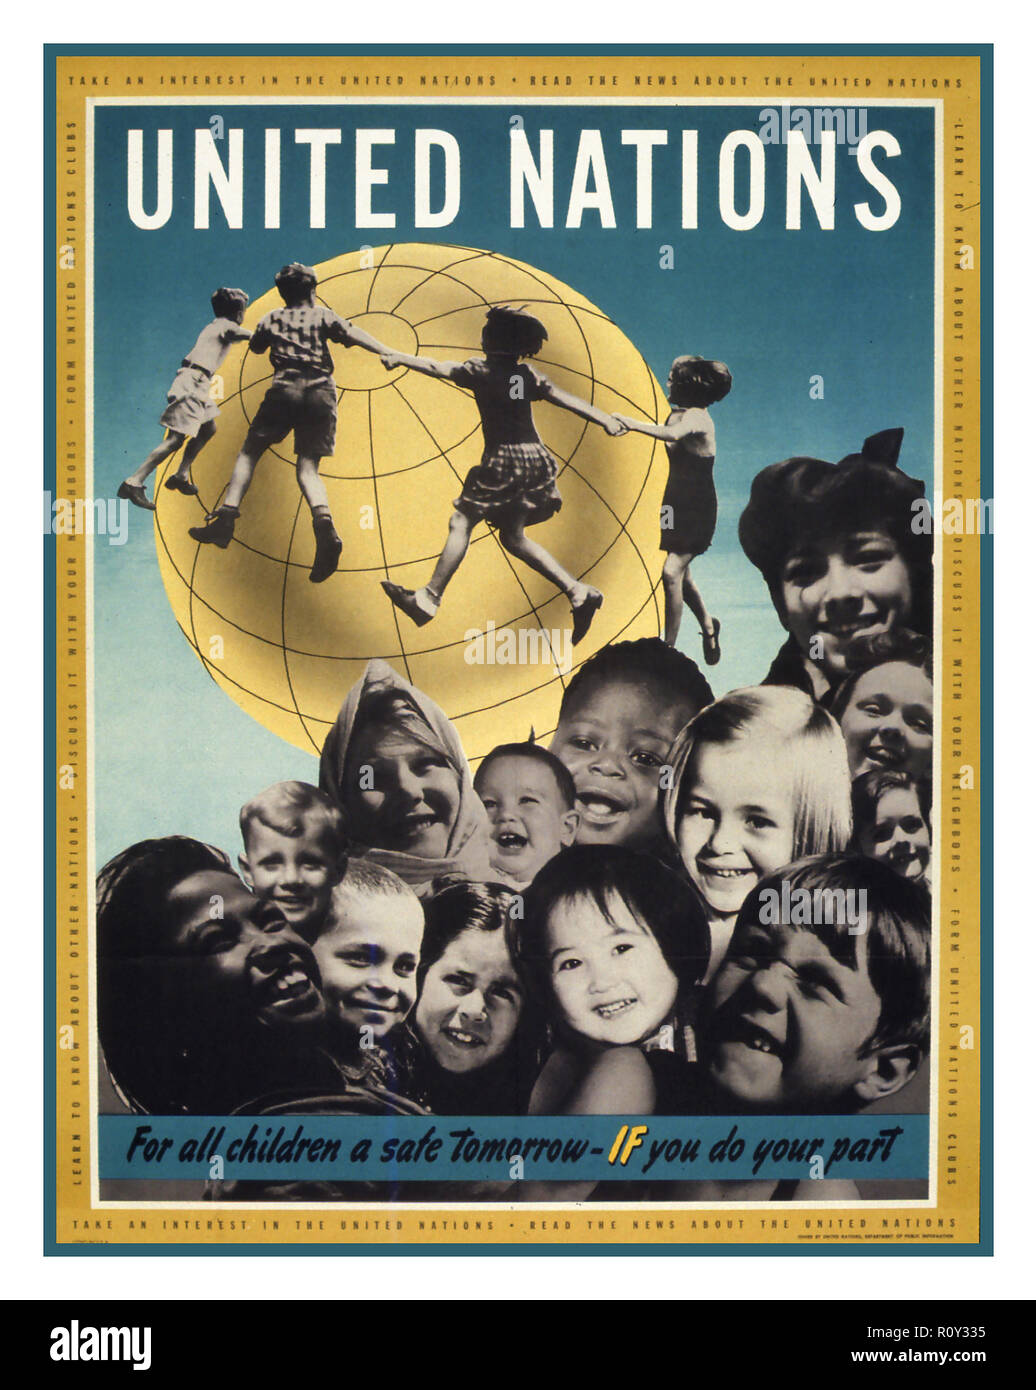 Vintage 1959 United Nations Poster 'Declaration of the Rights of the Child' illustrating a Globe with happy fulfilled children of all nationalities and ethnicities encircling it without boundaries. ‘For all children a safe tomorrow, IF you do your part’ Stock Photo